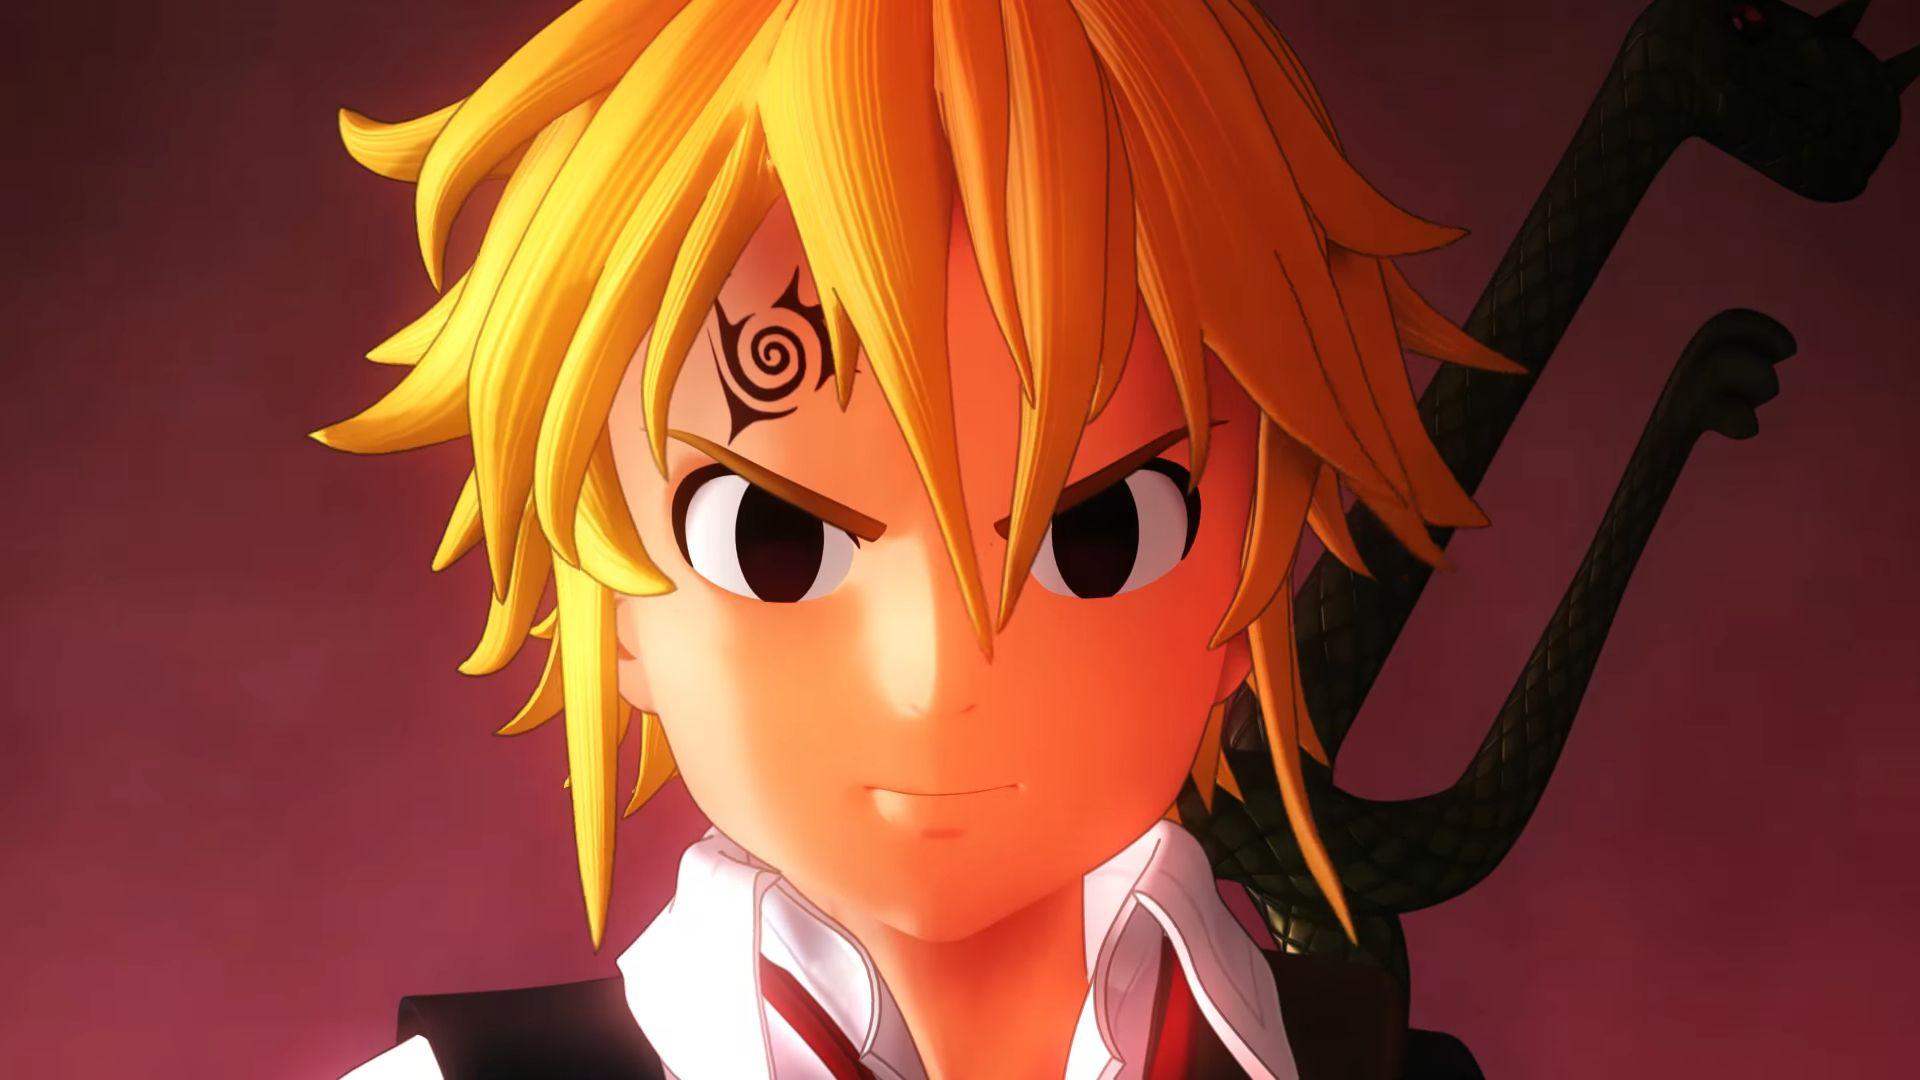 PS4 Exclusive The Seven Deadly Sins' Western Release Date Announced